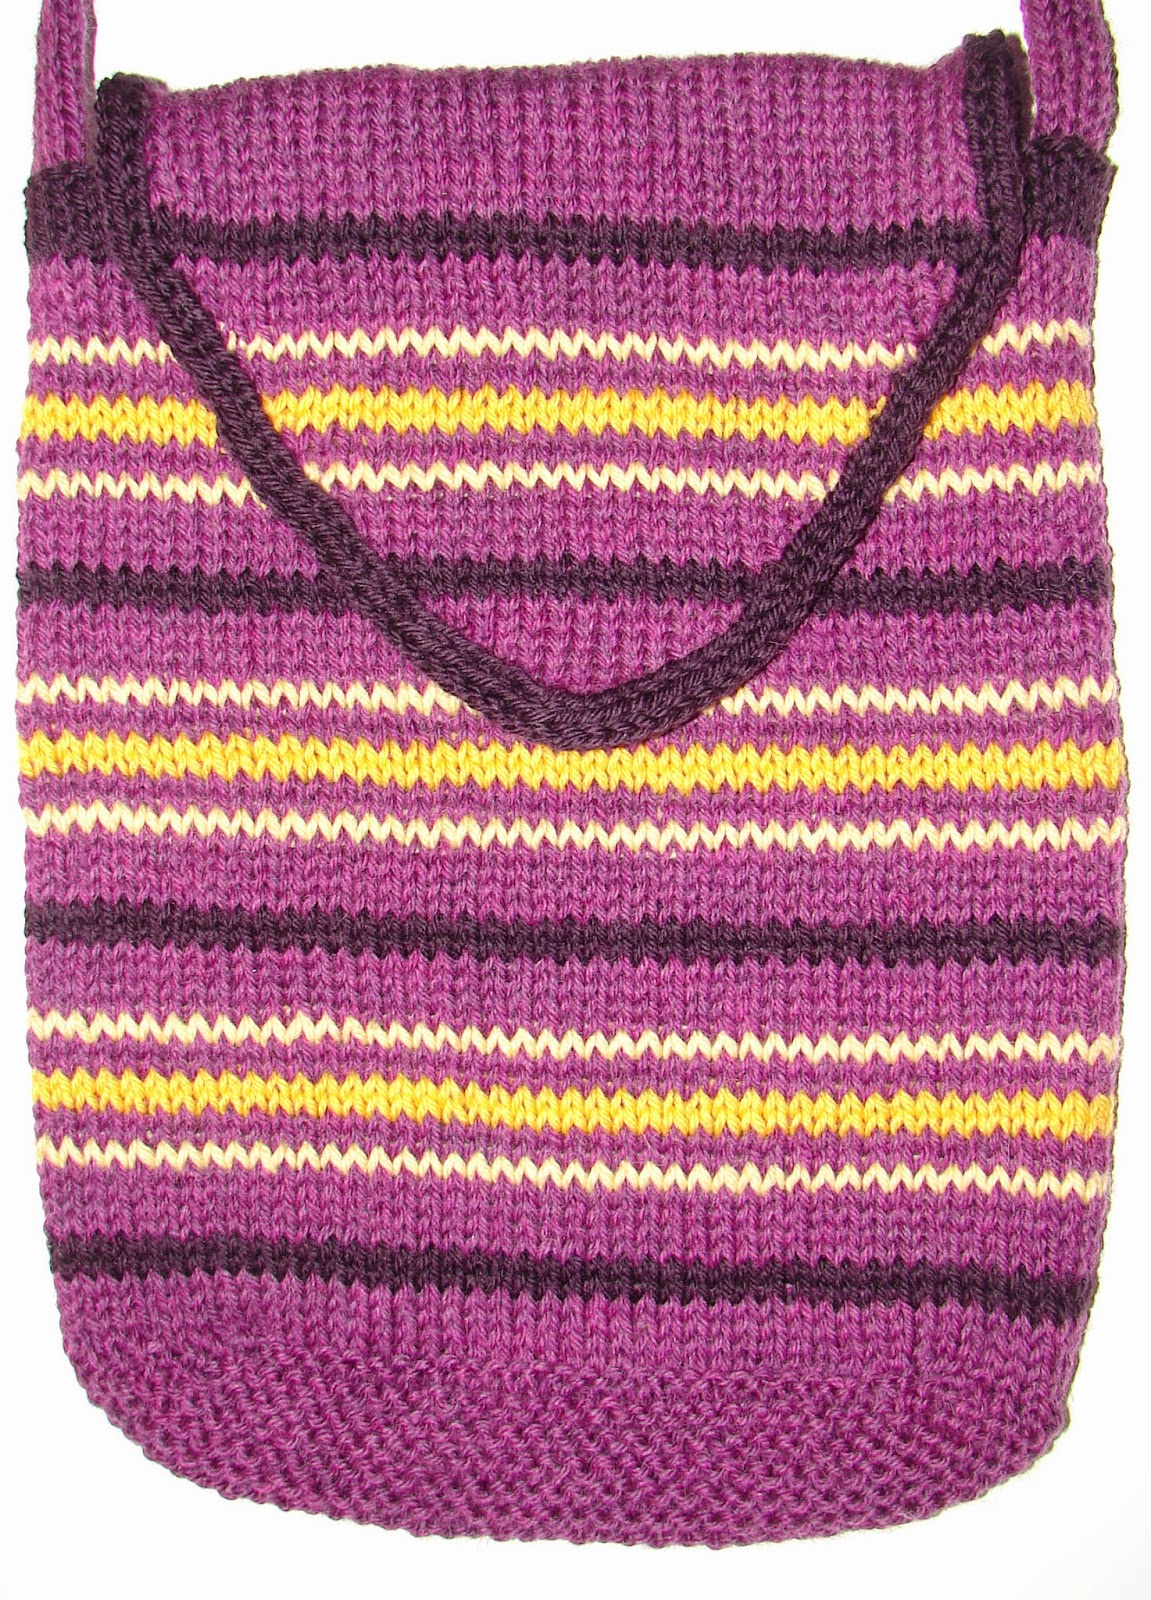 purse, bag, knitted, knit, felted, felt, striped, purple, yellow